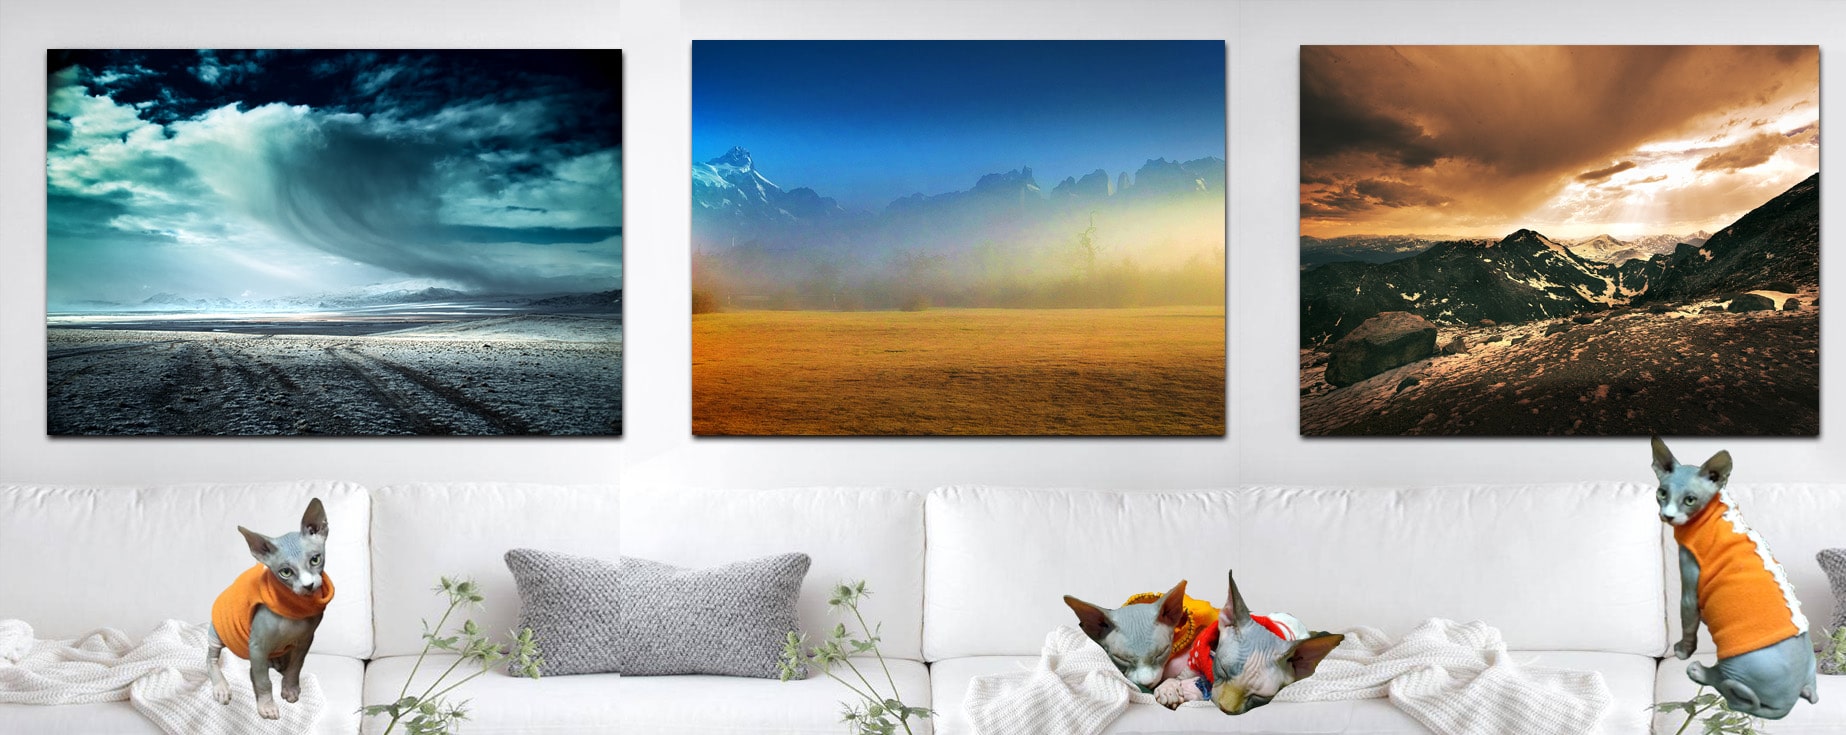 Mountainscapes Photos and Wall Art Prints